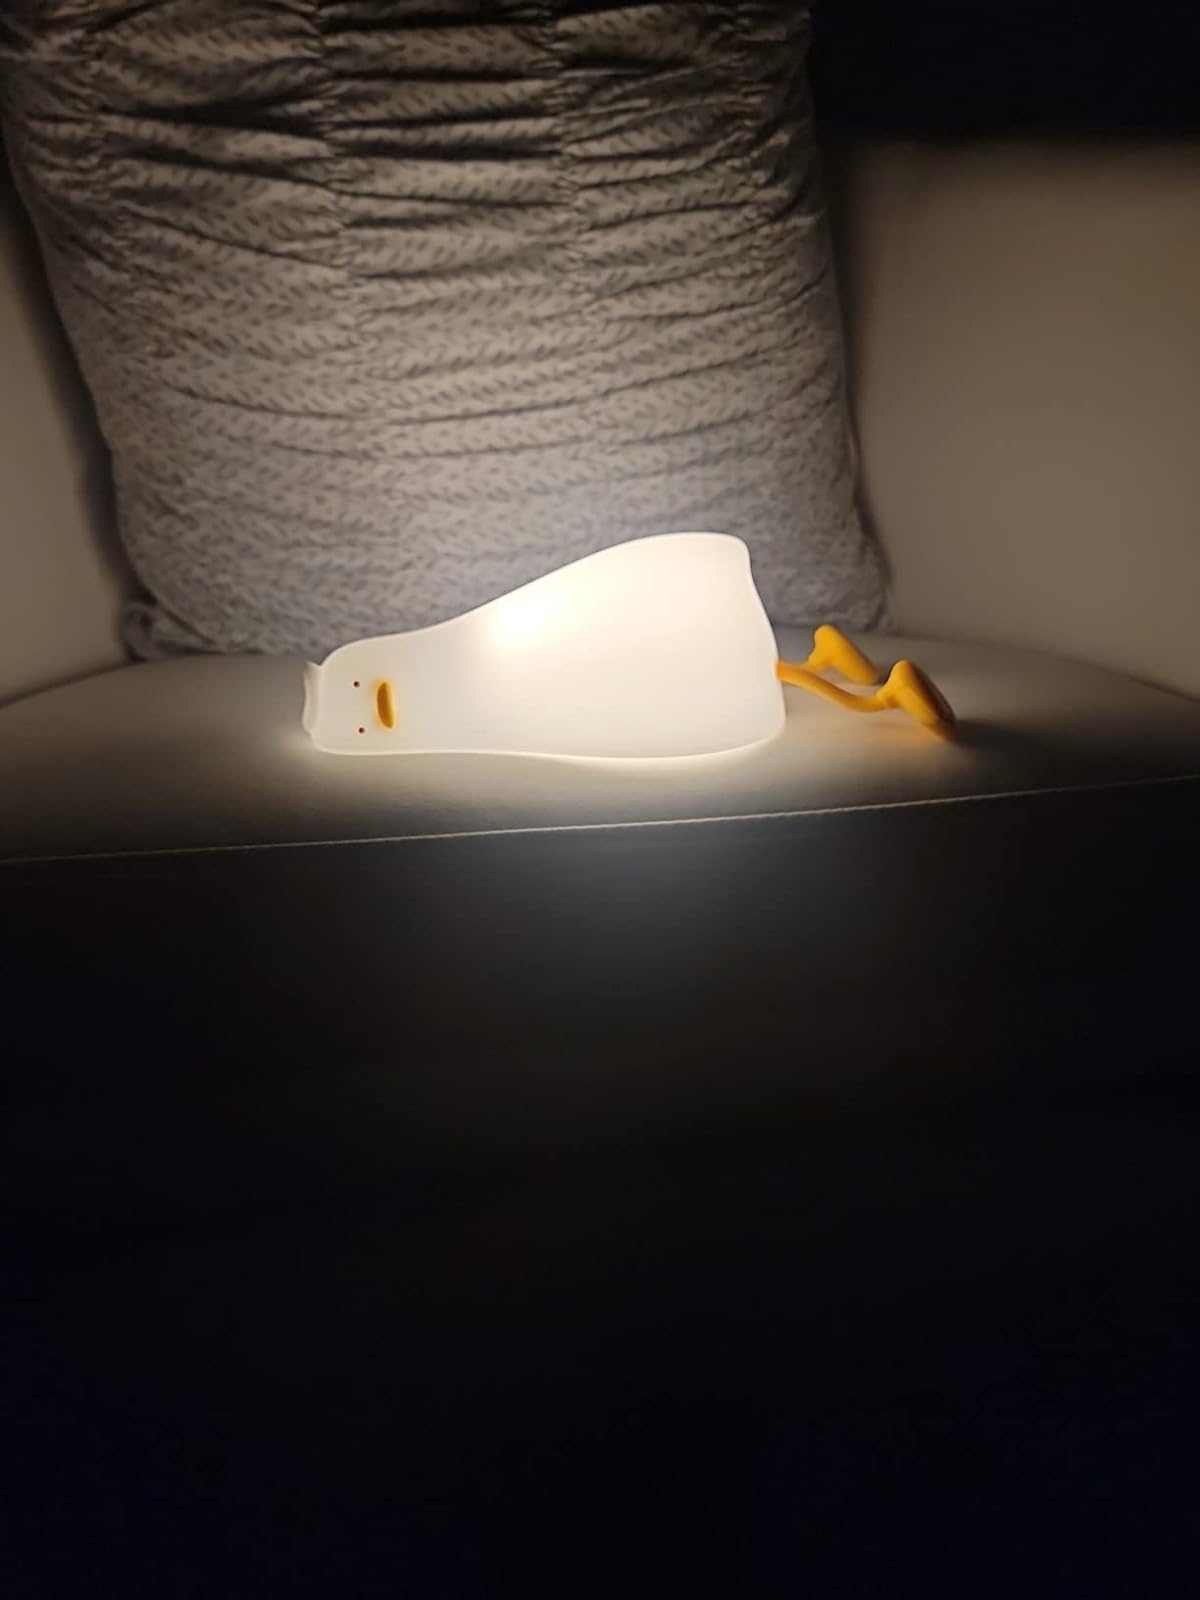 Reviewer image of the lit up duck night light on an armchair